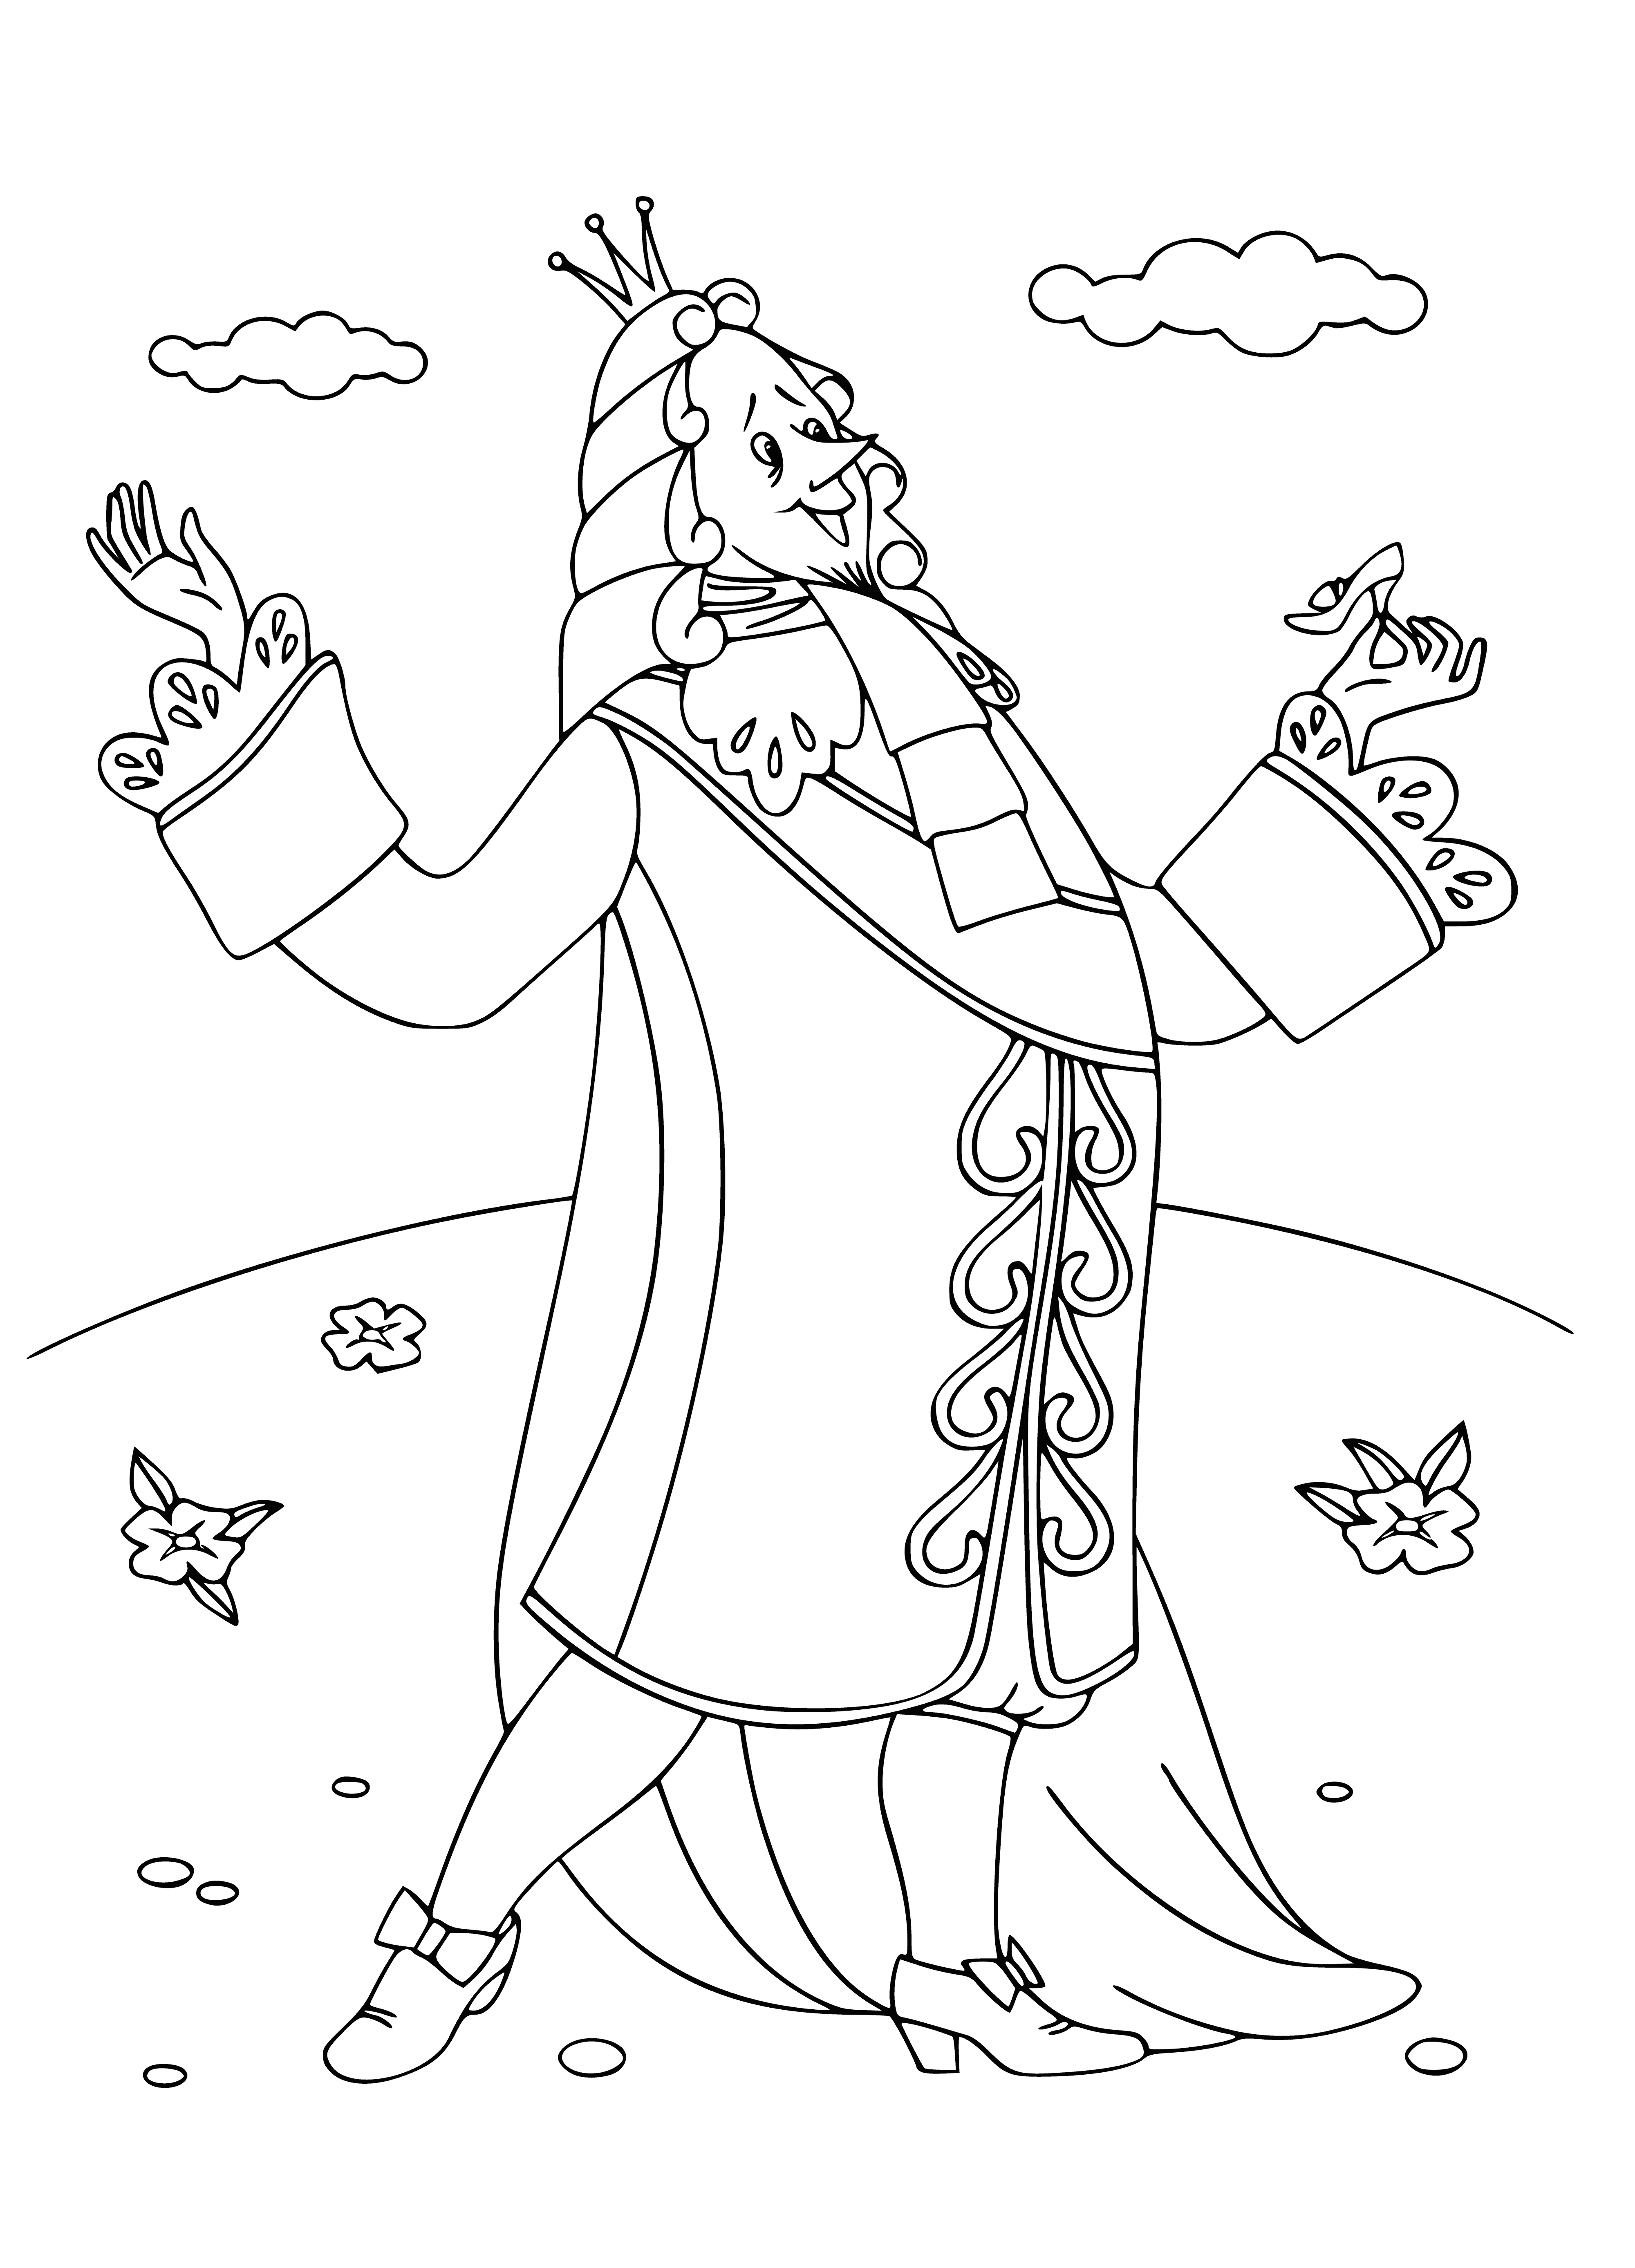 coloring page: The king holds a crystal slipper with wonder, admiring it closely. #fairytale